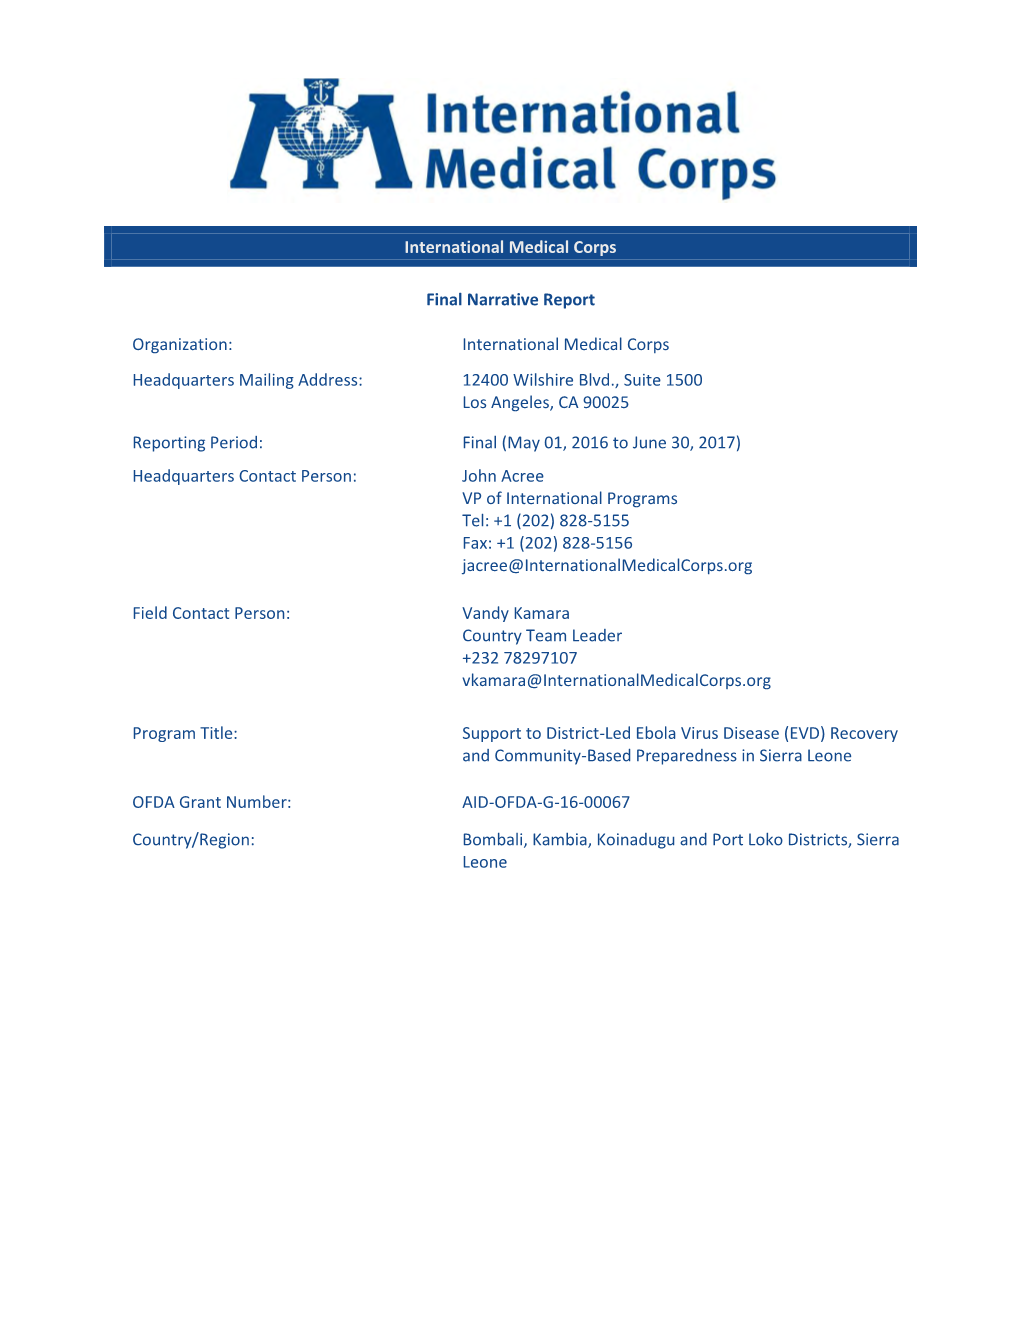 International Medical Corps Headquarters Mailing Address: 12400 Wilshire Blvd., Suite 1500 Los Angeles, CA 90025